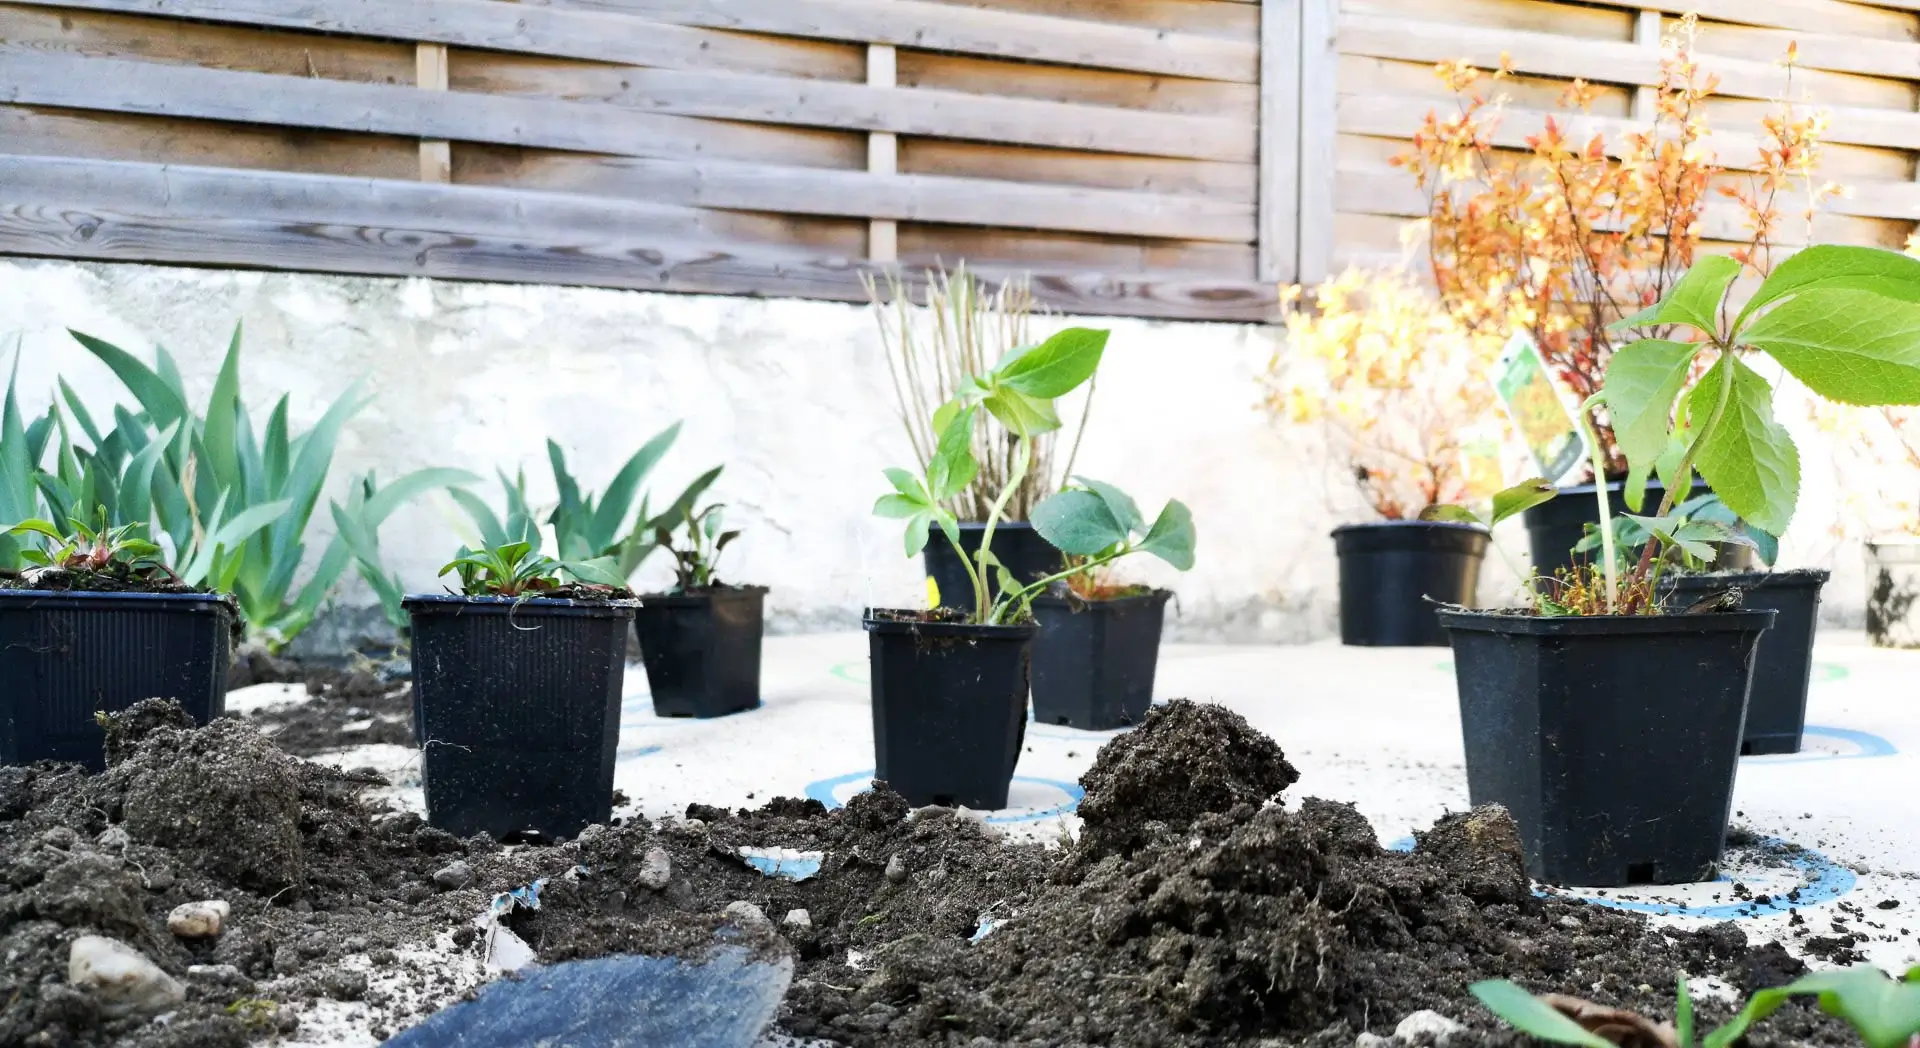 photo of plants in pots placed on the biodegradable cardboard provided by draw me a garden